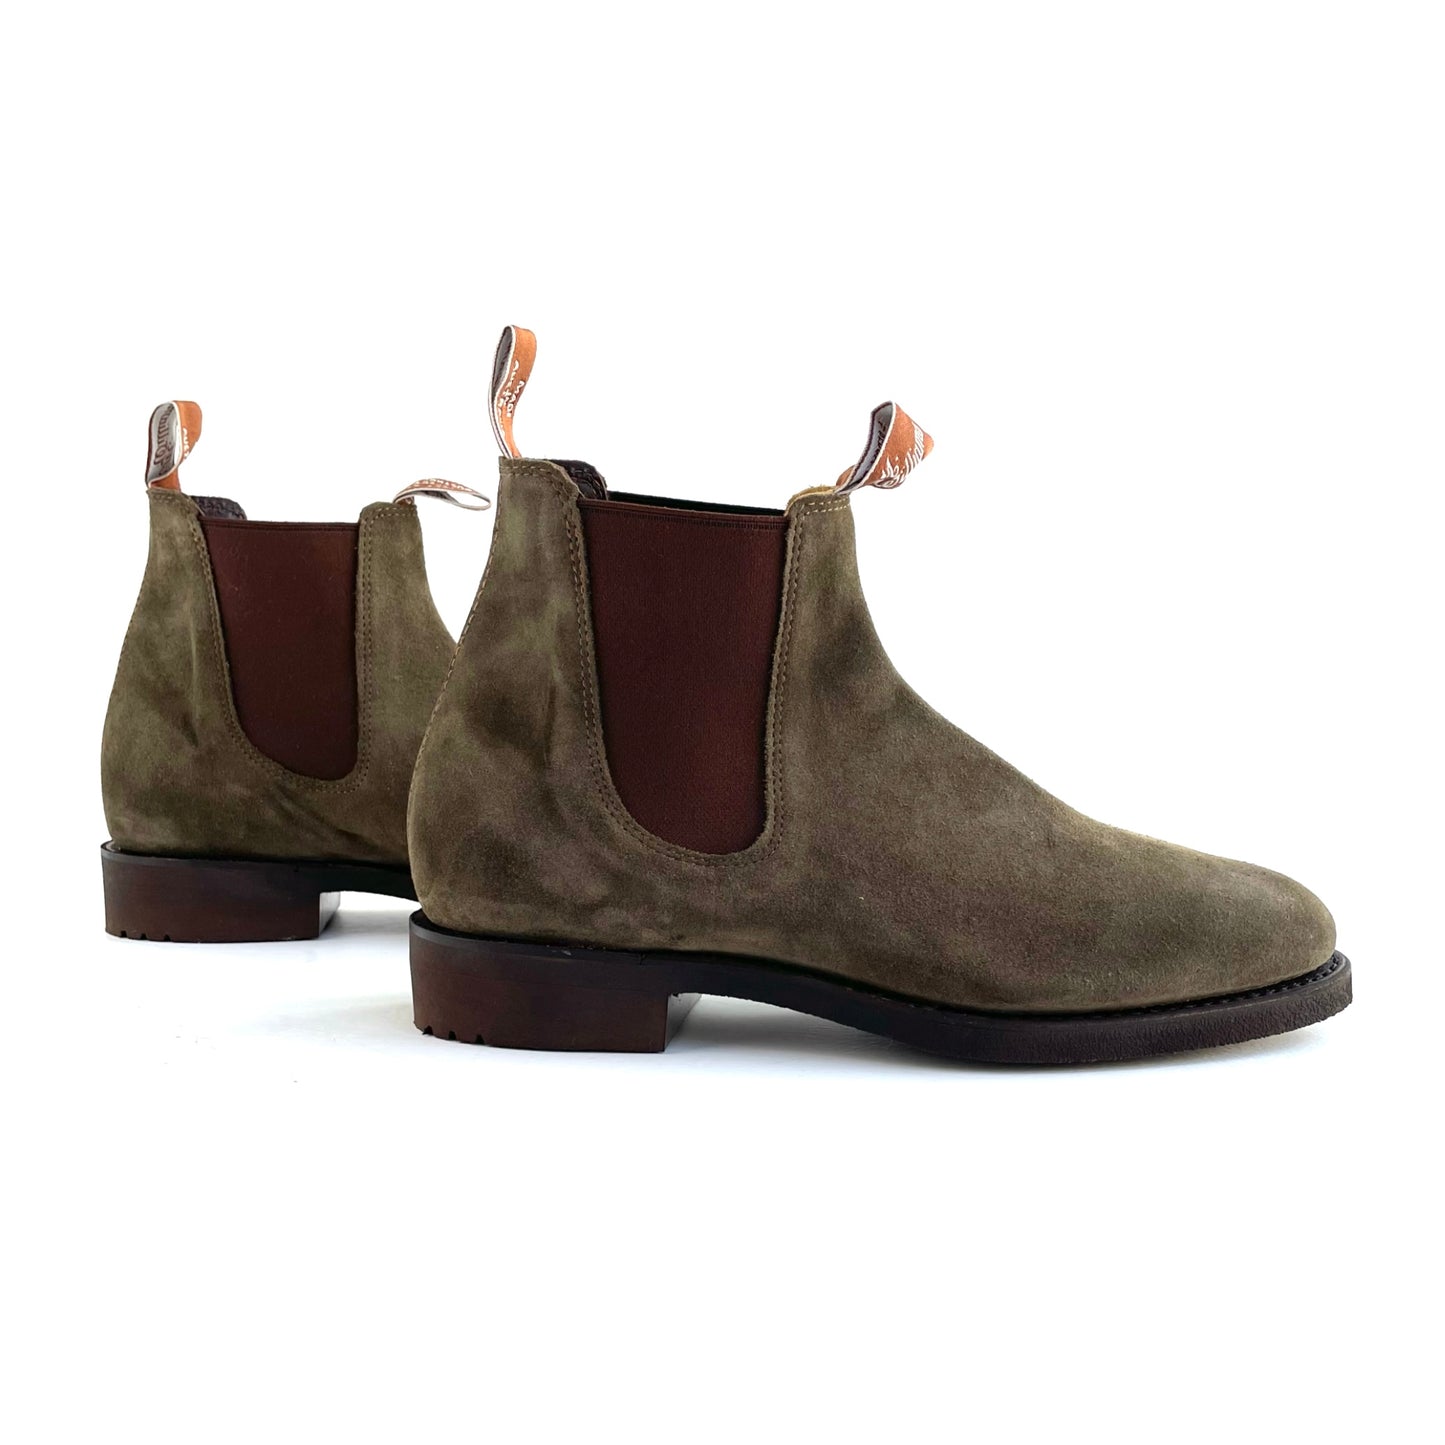 RM WILLIAMS SIDE GORE BOOTS SUEDE